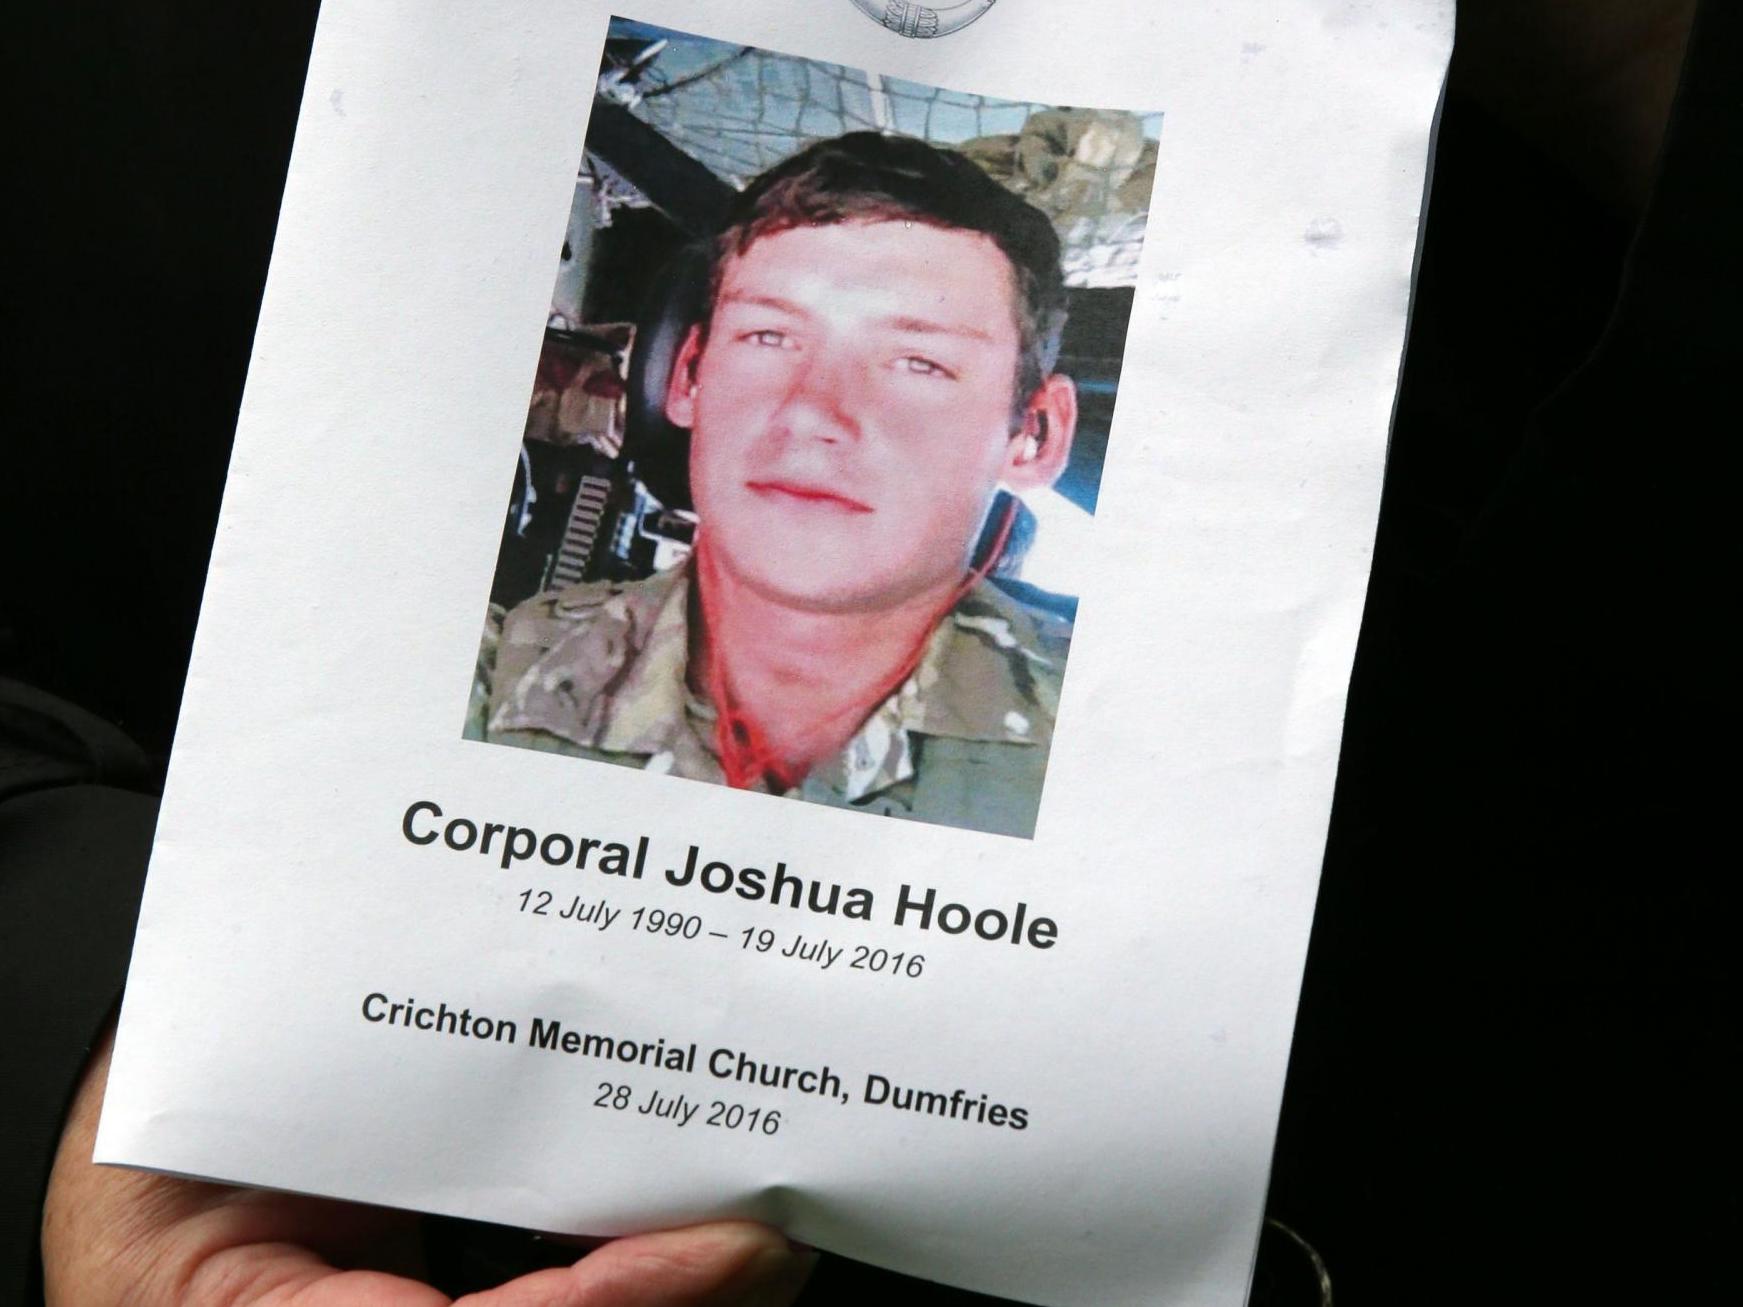 Corporal Joshua Hoole collapsed near the end of an eight-mile march at an army training centre